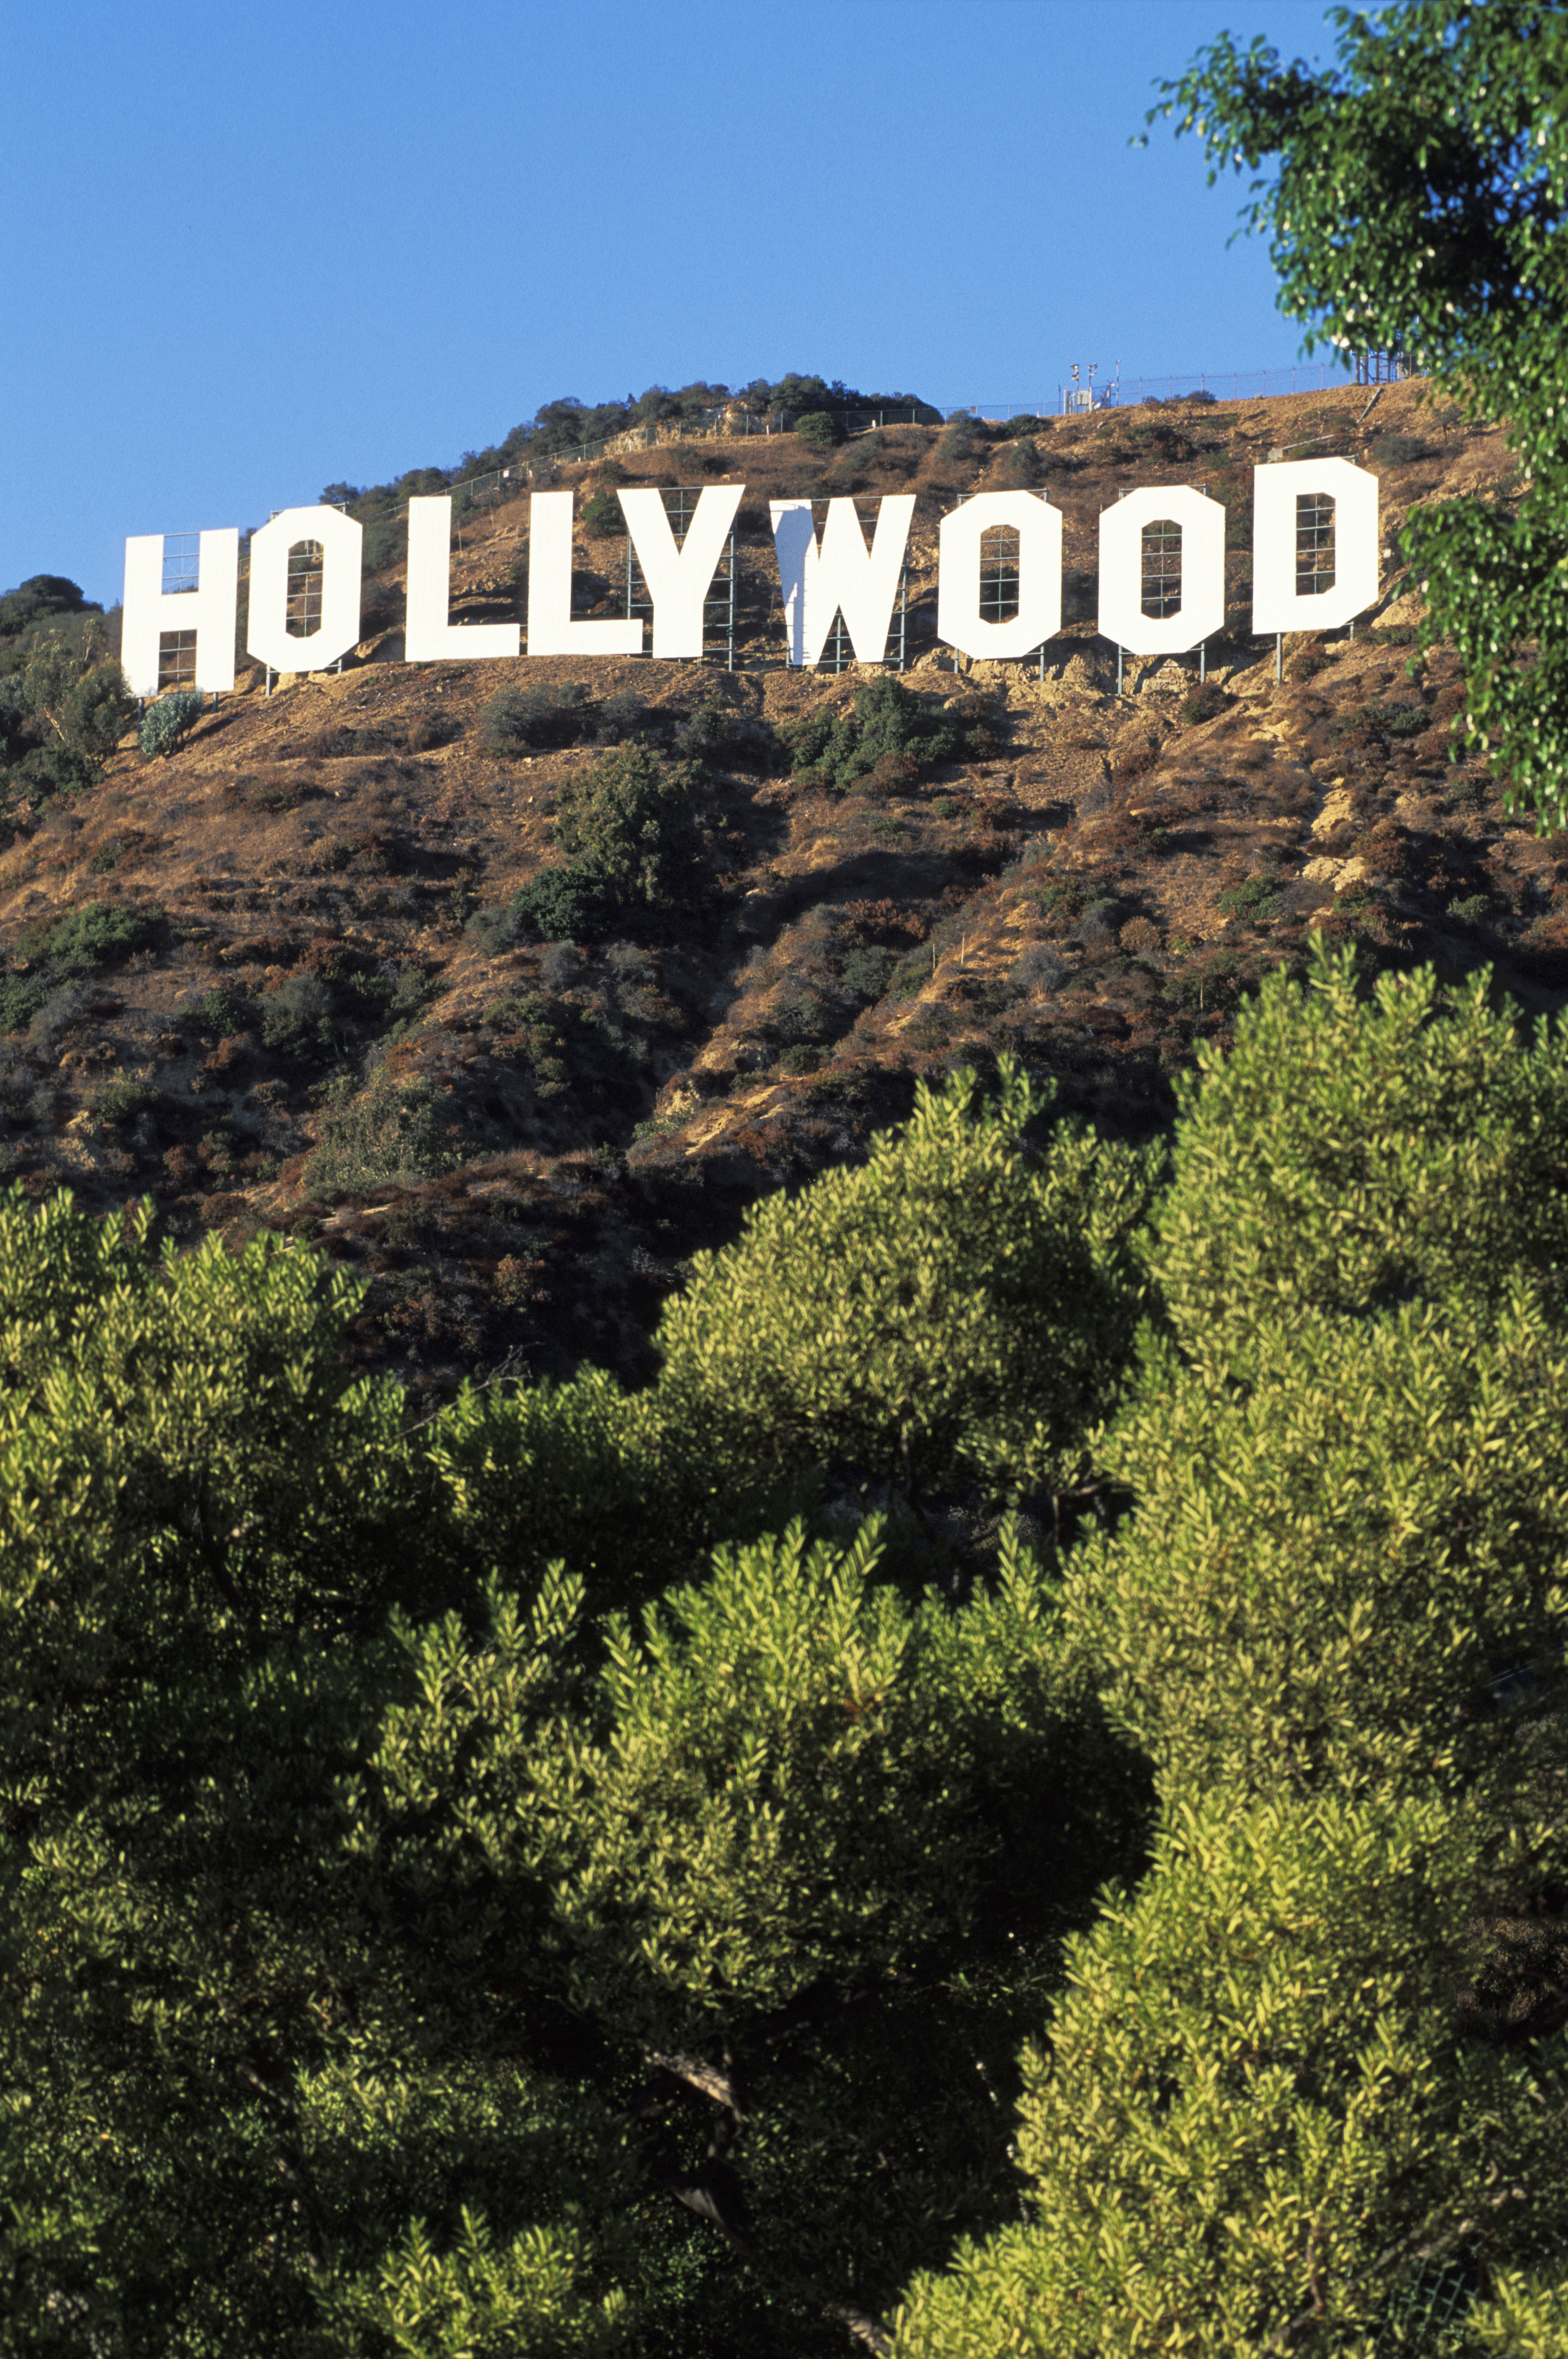 The Hollywood sign in Los Angeles, California. (Chris Cheadle—All Canada Photos/Getty Images)